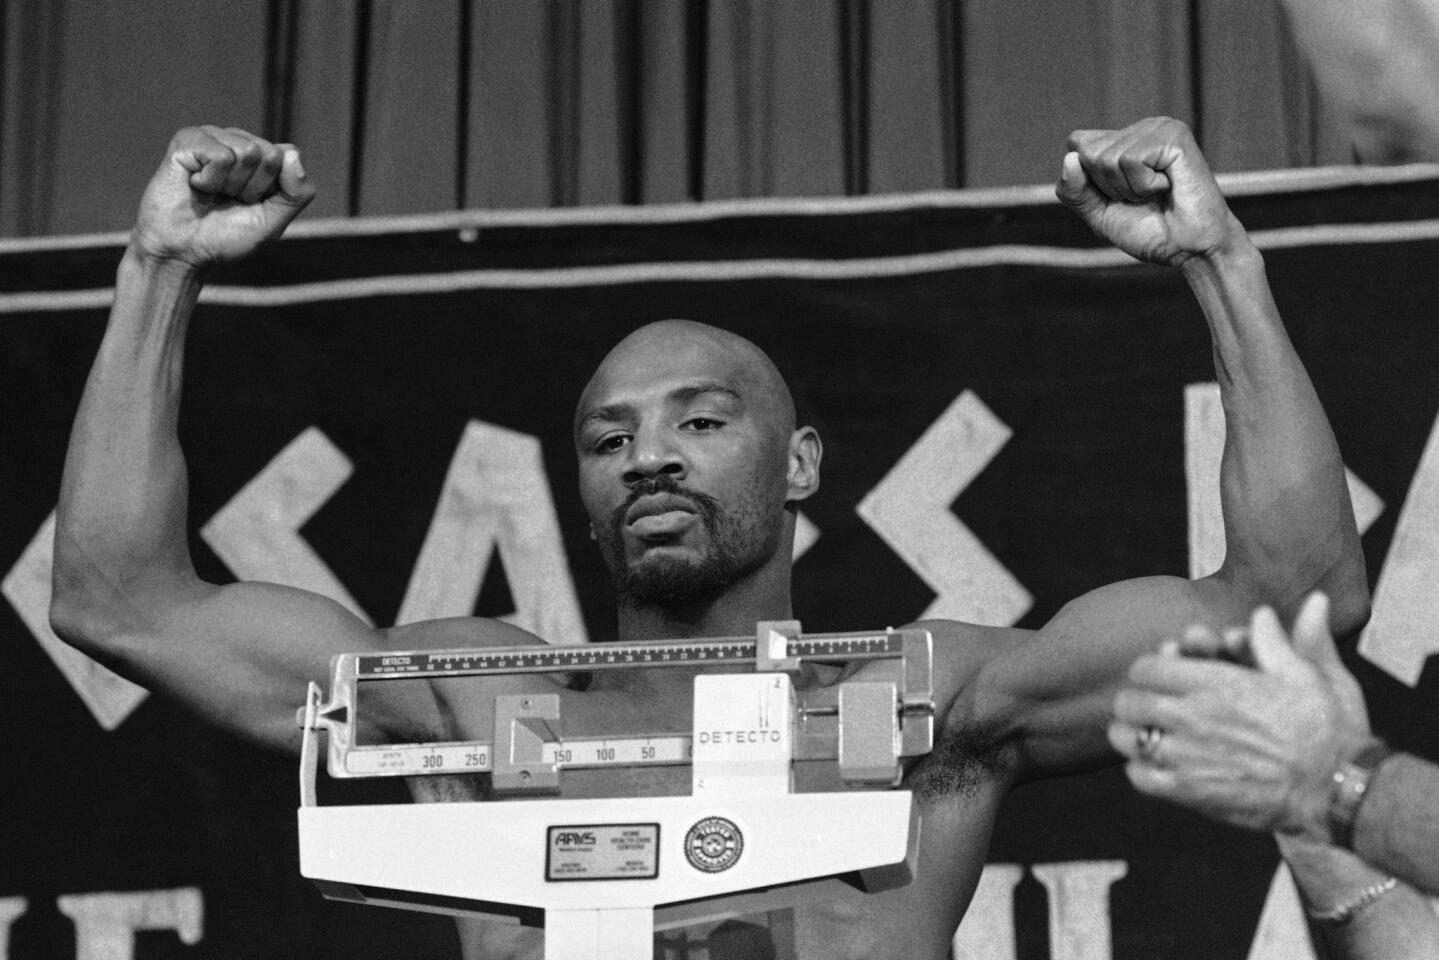 April 15, 1985 -- Middleweight champion Marvin Hagler steps on the scales and raises his arms at the weigh-in for his title fight with Tommy Hearns in Las Vegas.